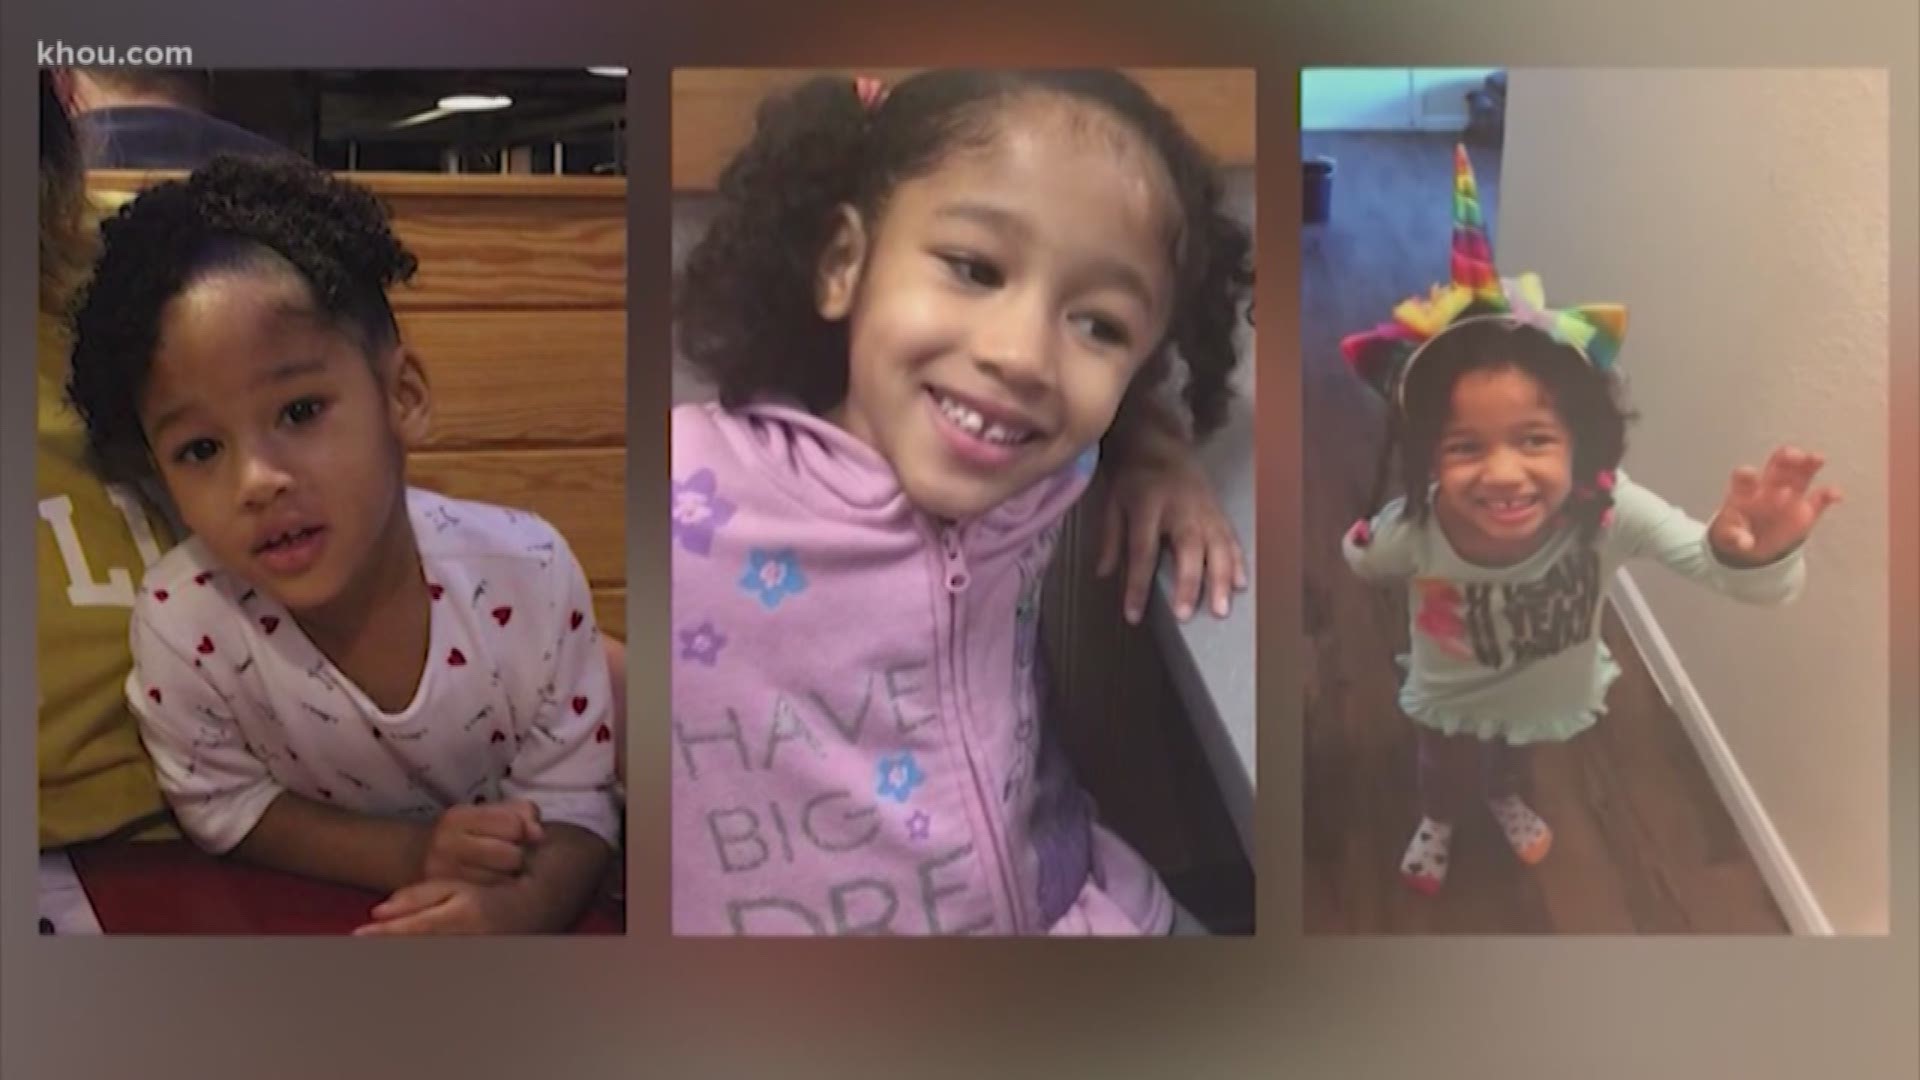 The remains found in Arkansas while searching for missing 4-year-old Maleah Davis are at the Harris County Forensic Science Center. A spokesperson told us the determination of the identity won't be released for a while.